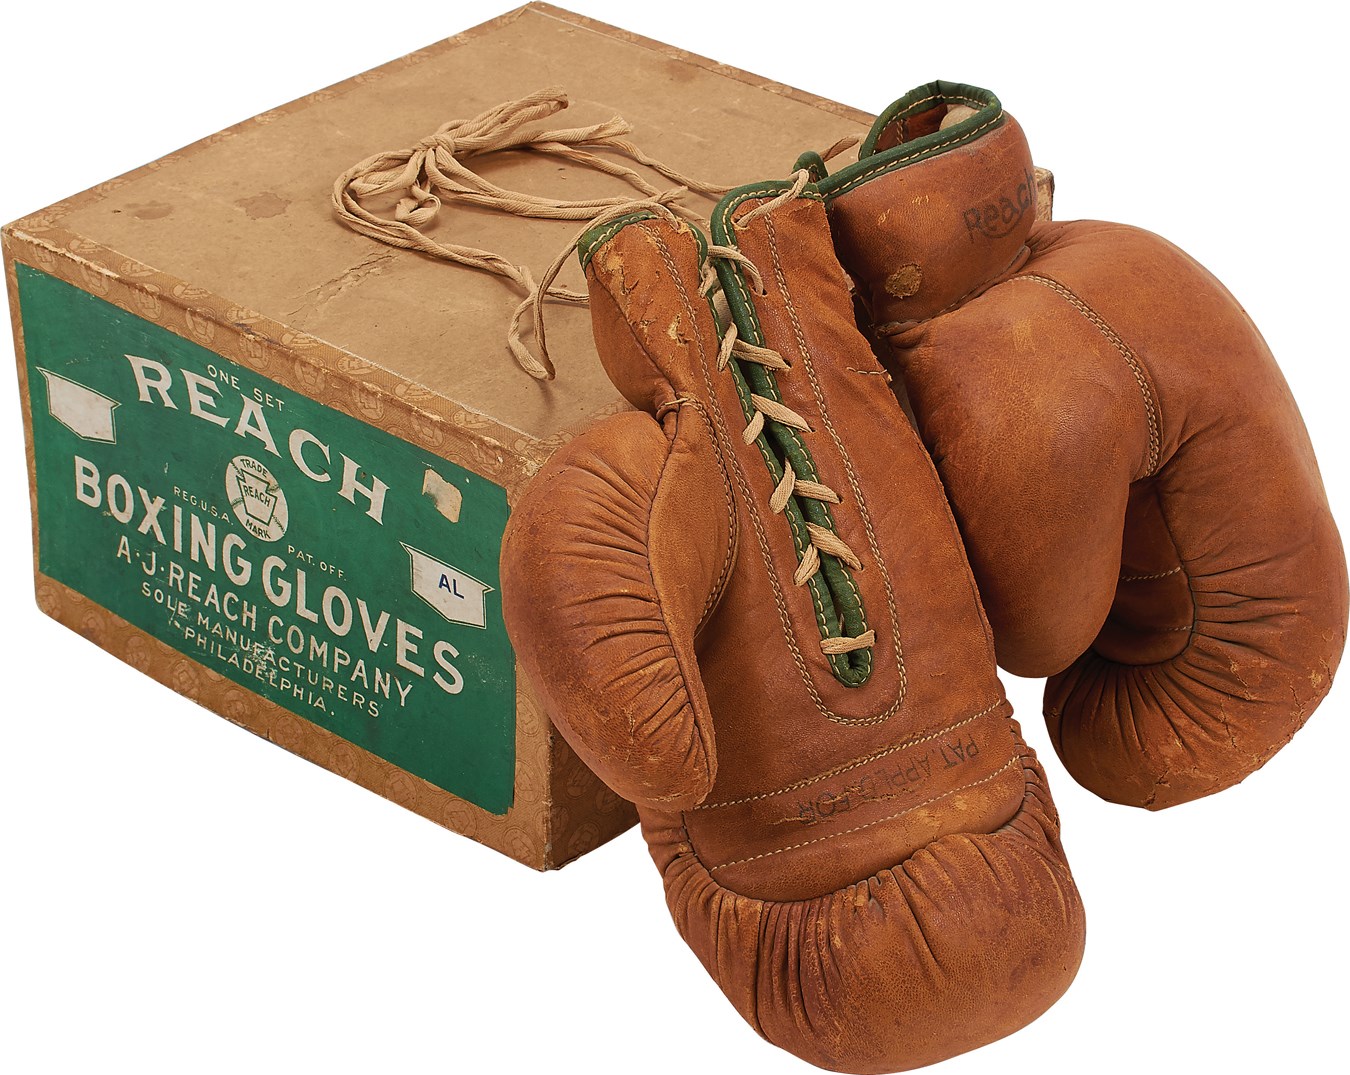 Muhammad Ali & Boxing - Early 1900s Reach Boxing Gloves in Original Box